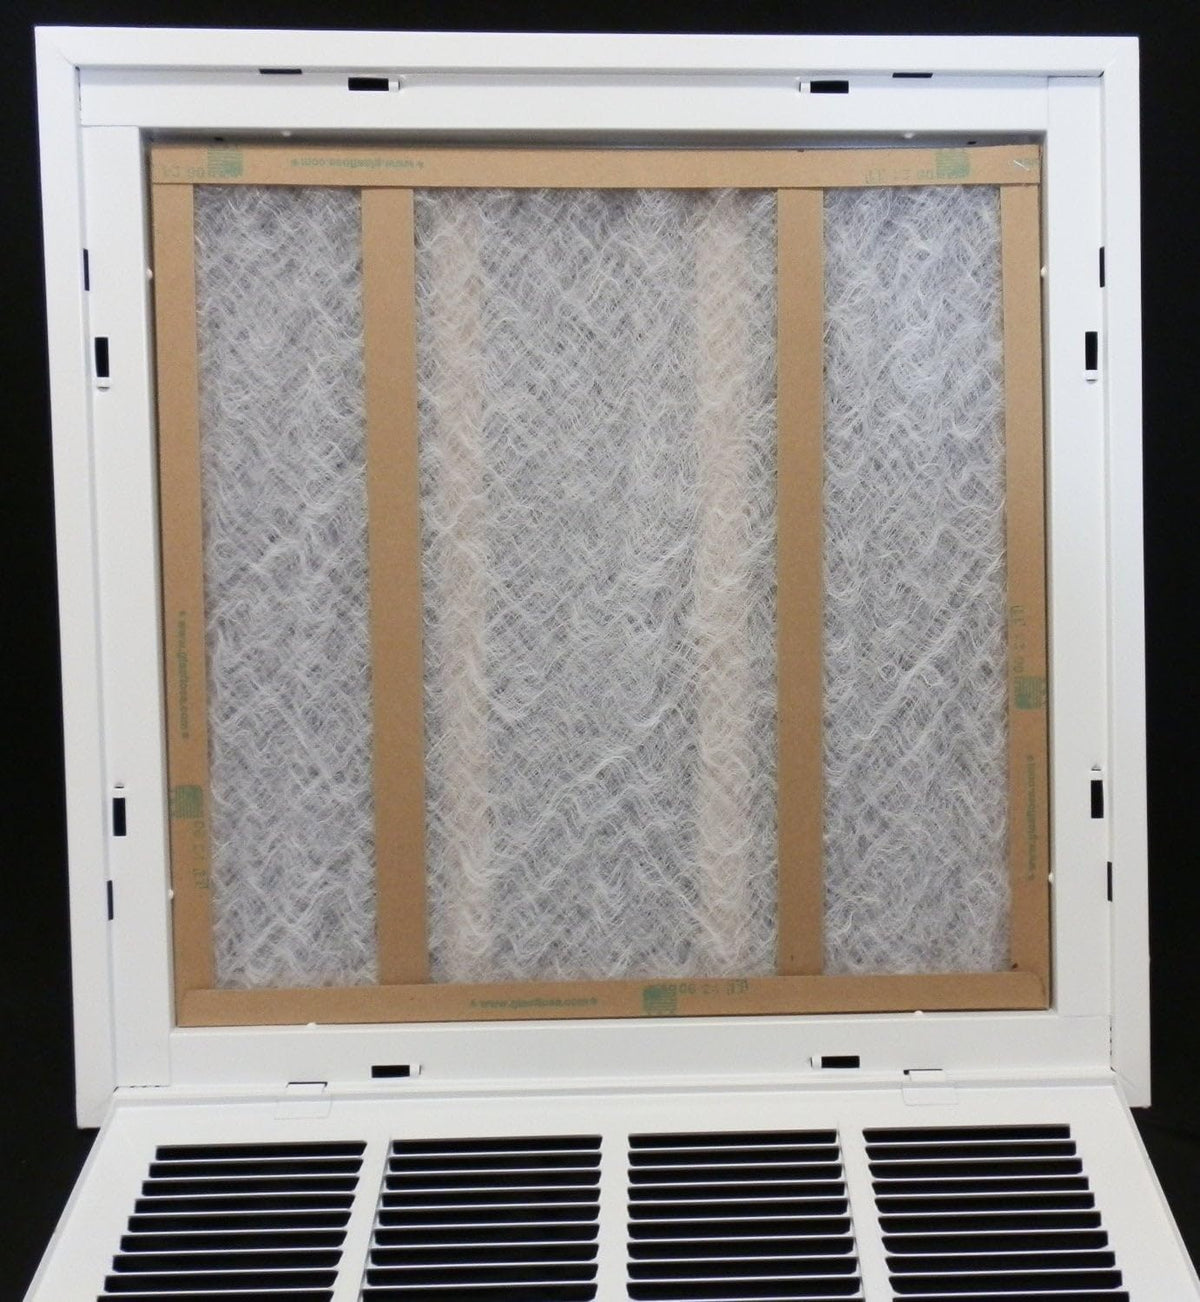 28&quot; X 18&quot; Steel Return Air Filter Grille for 1&quot; Filter - Removable Frame - [Outer Dimensions: 30 5/8&quot; X 20 5/8&quot;]